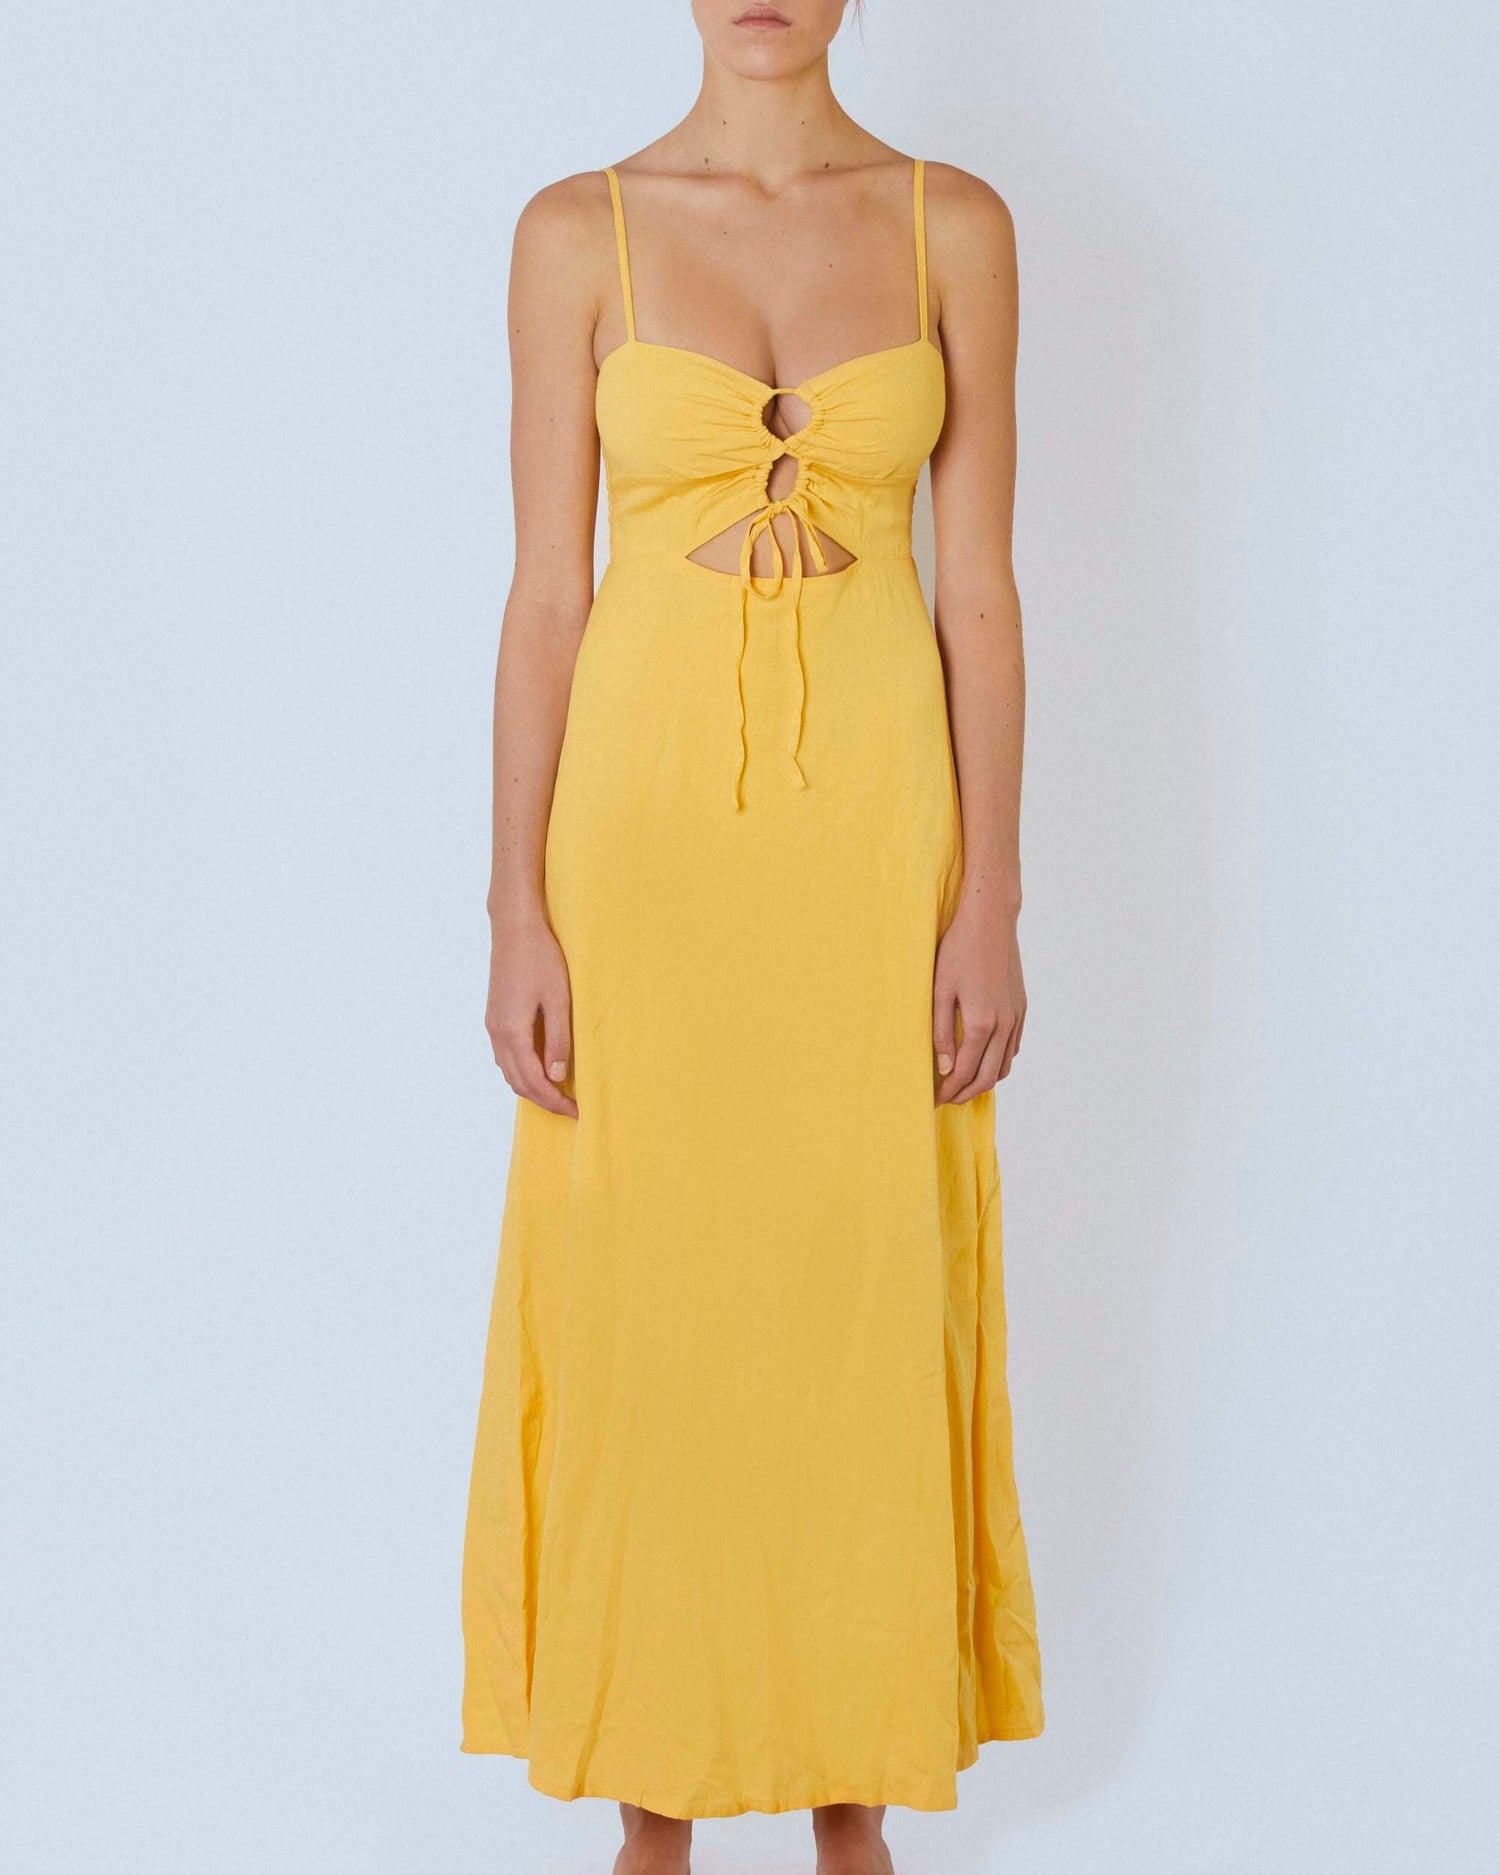 Its now cool DRESS(4FRONT) LIMA MAXI DRESS - SUNSET in Sonnenuntergang